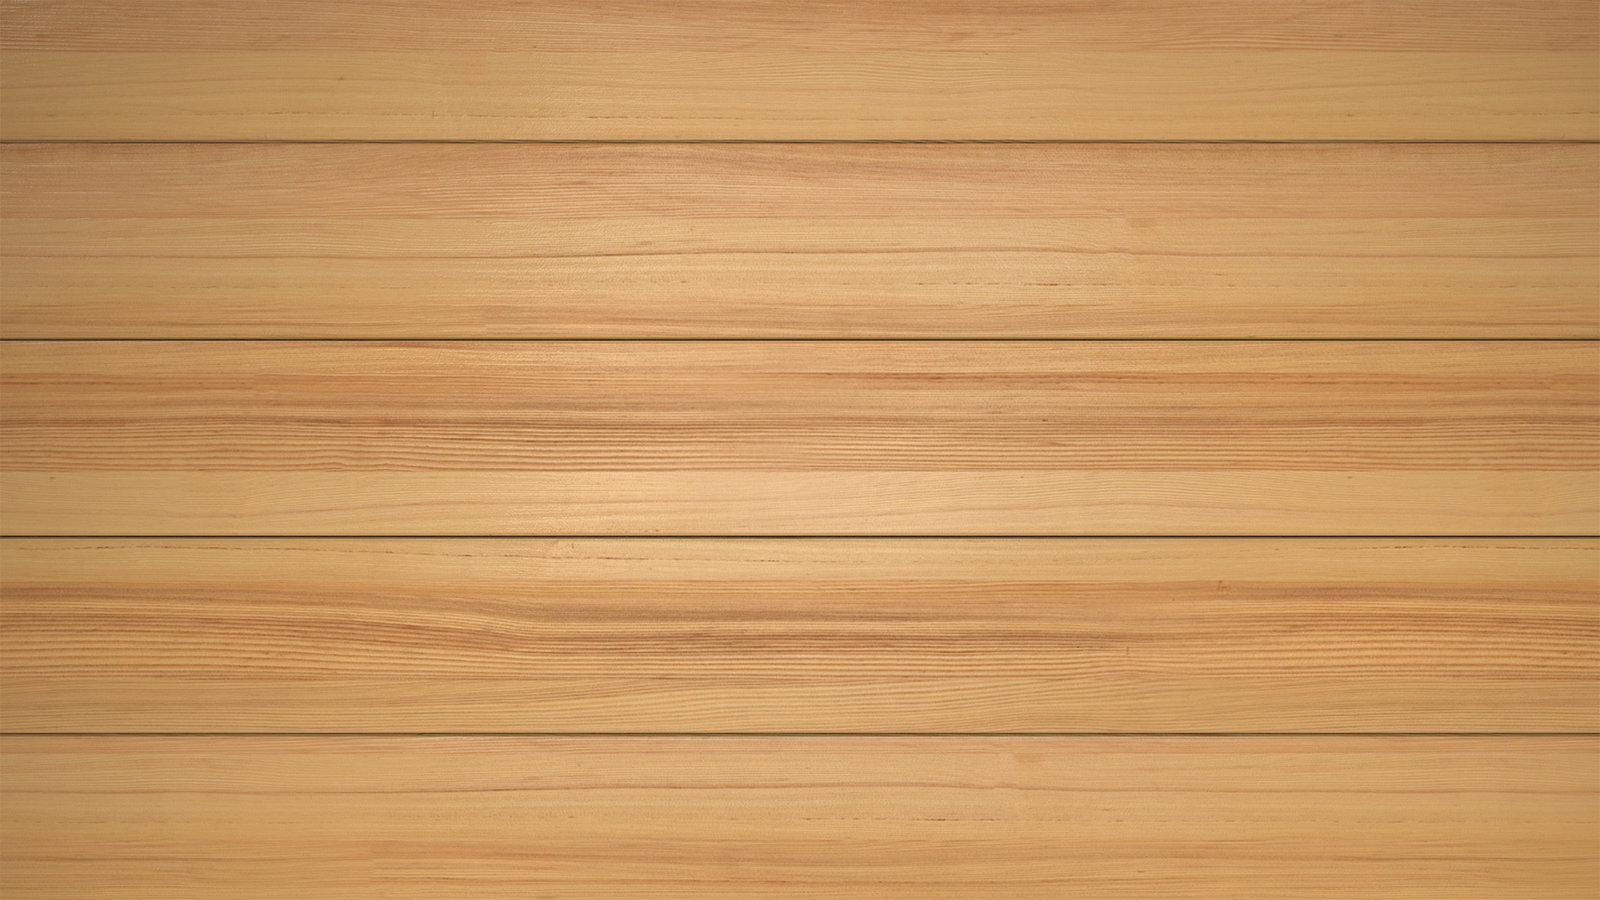 Wood Planks Background nr 2 by RVMProductions on DeviantArt